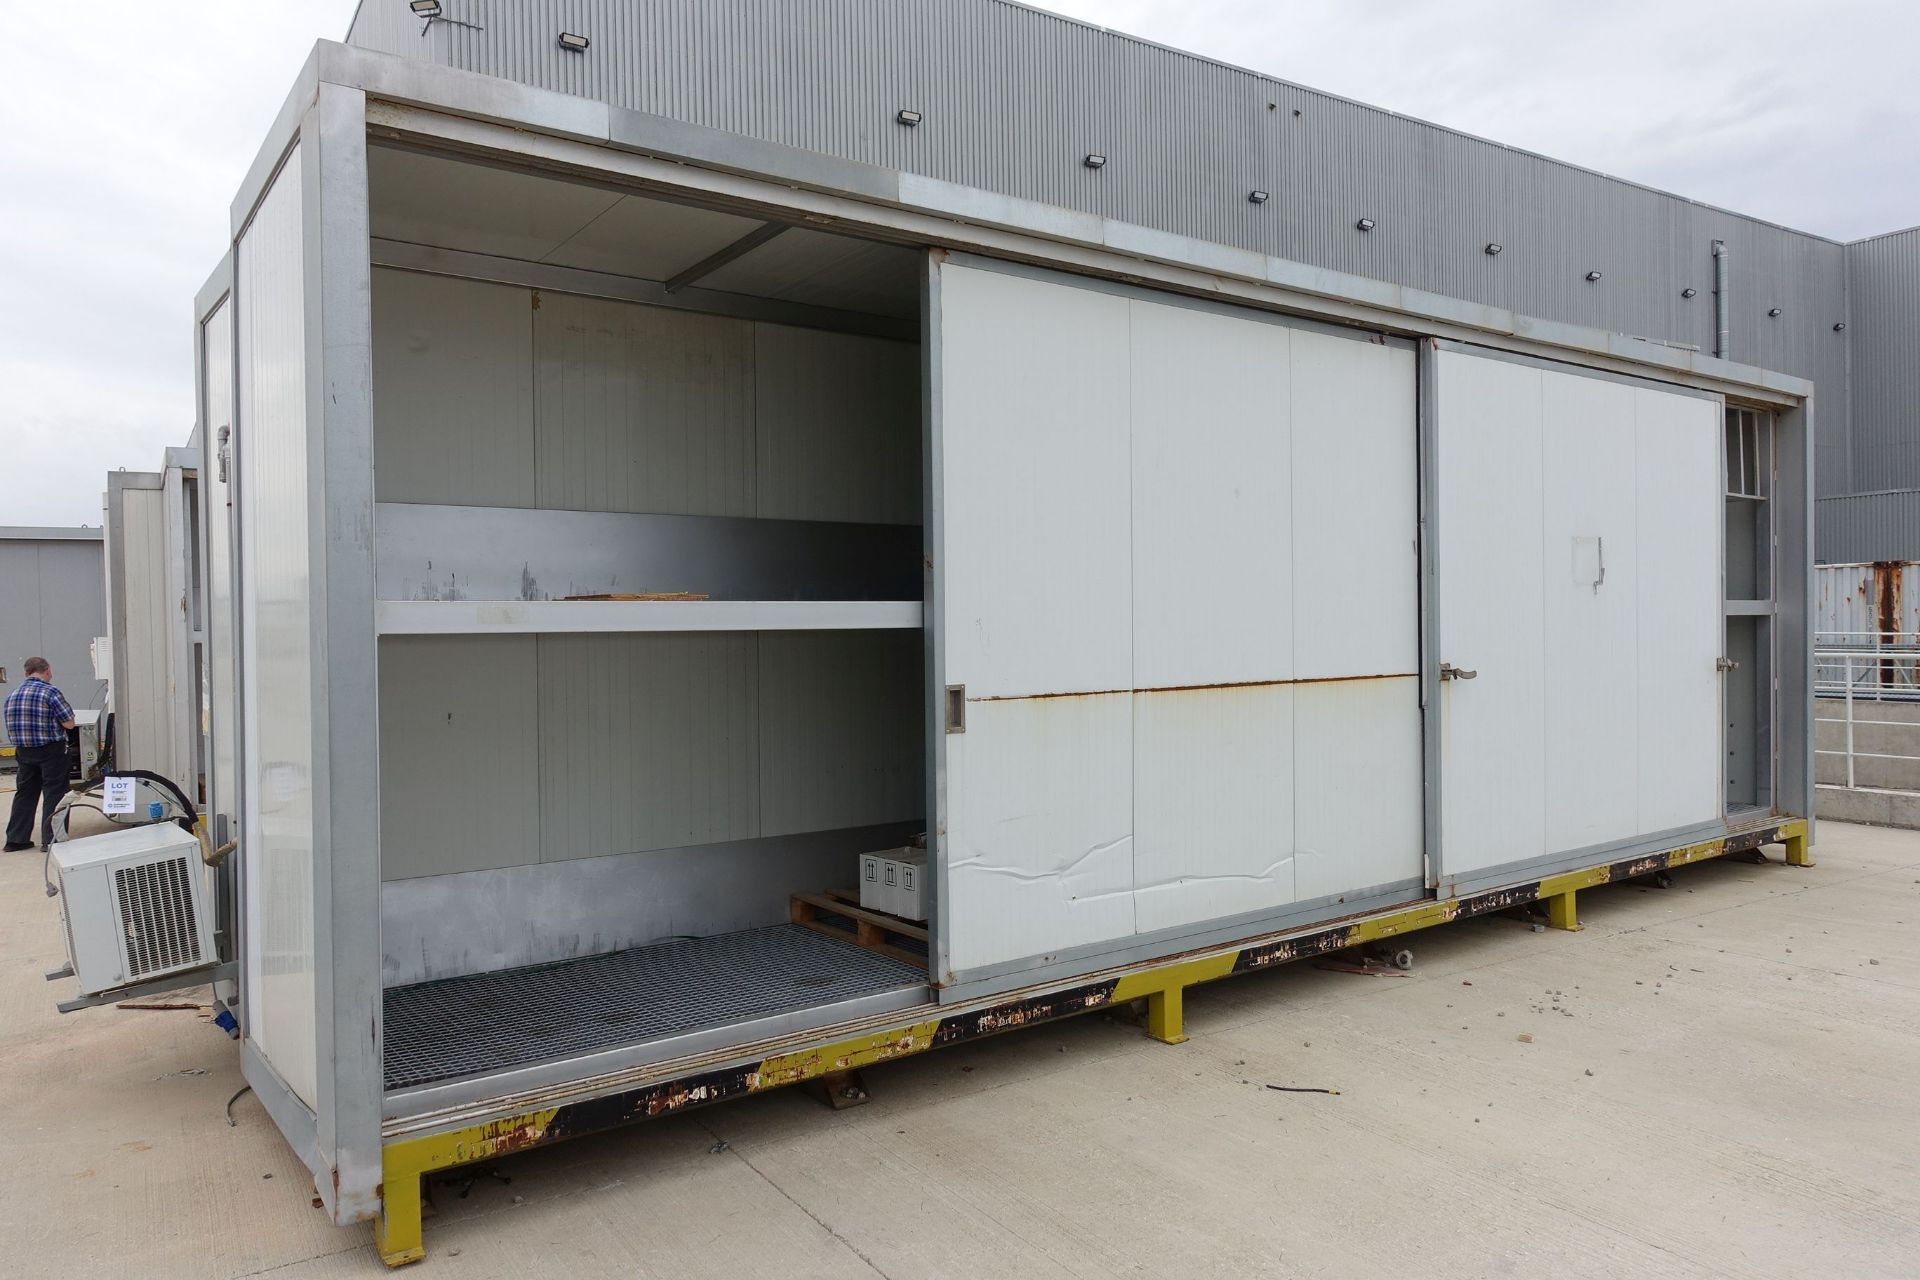 Intracon Chilled Container, 9m Long x 1.5m Deep x 3m High (aproximaely) with MDH-NF-2034A Chiller (